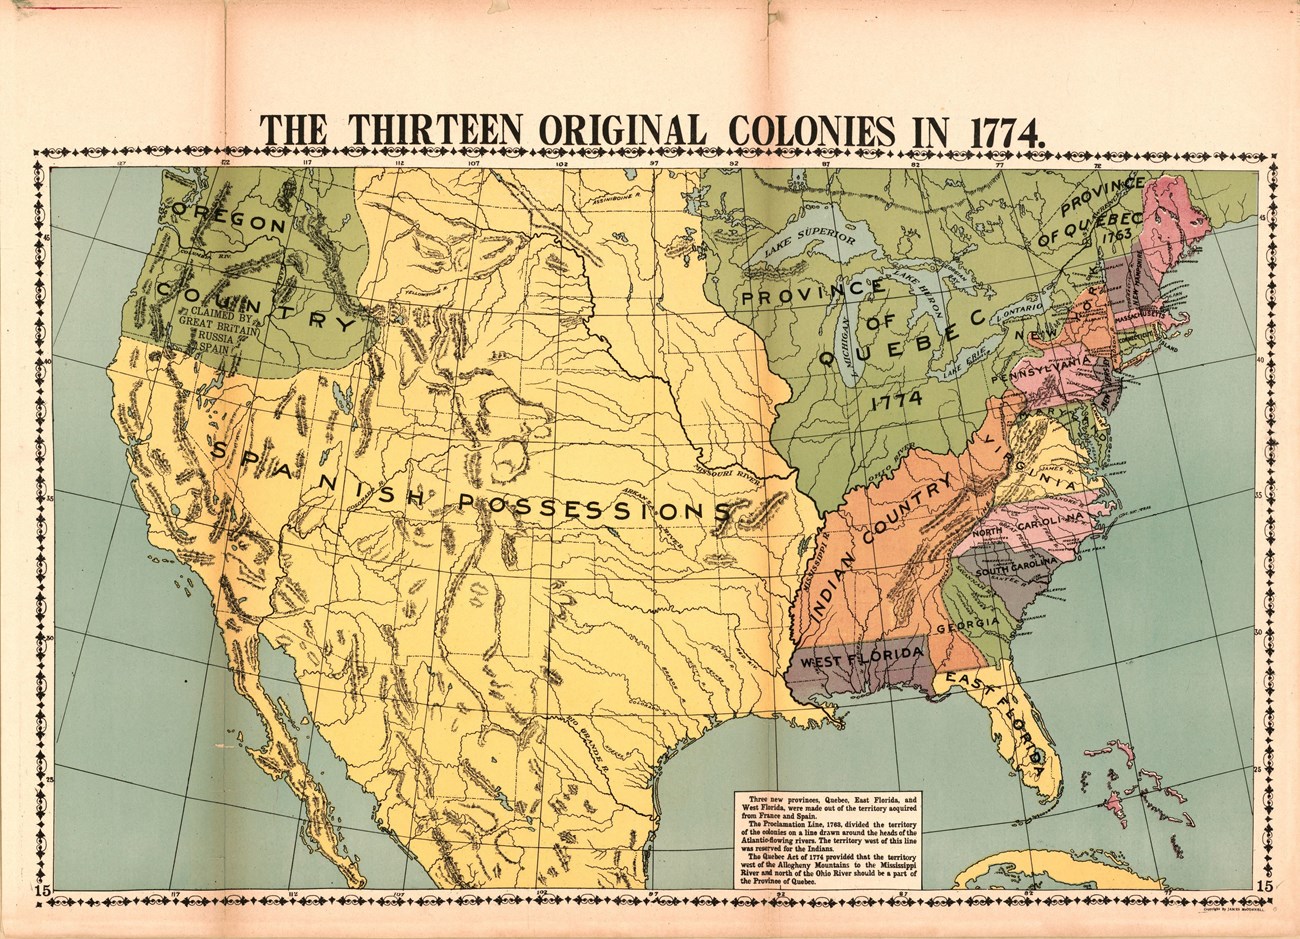 Old map showing the original 13 colonies in 1774